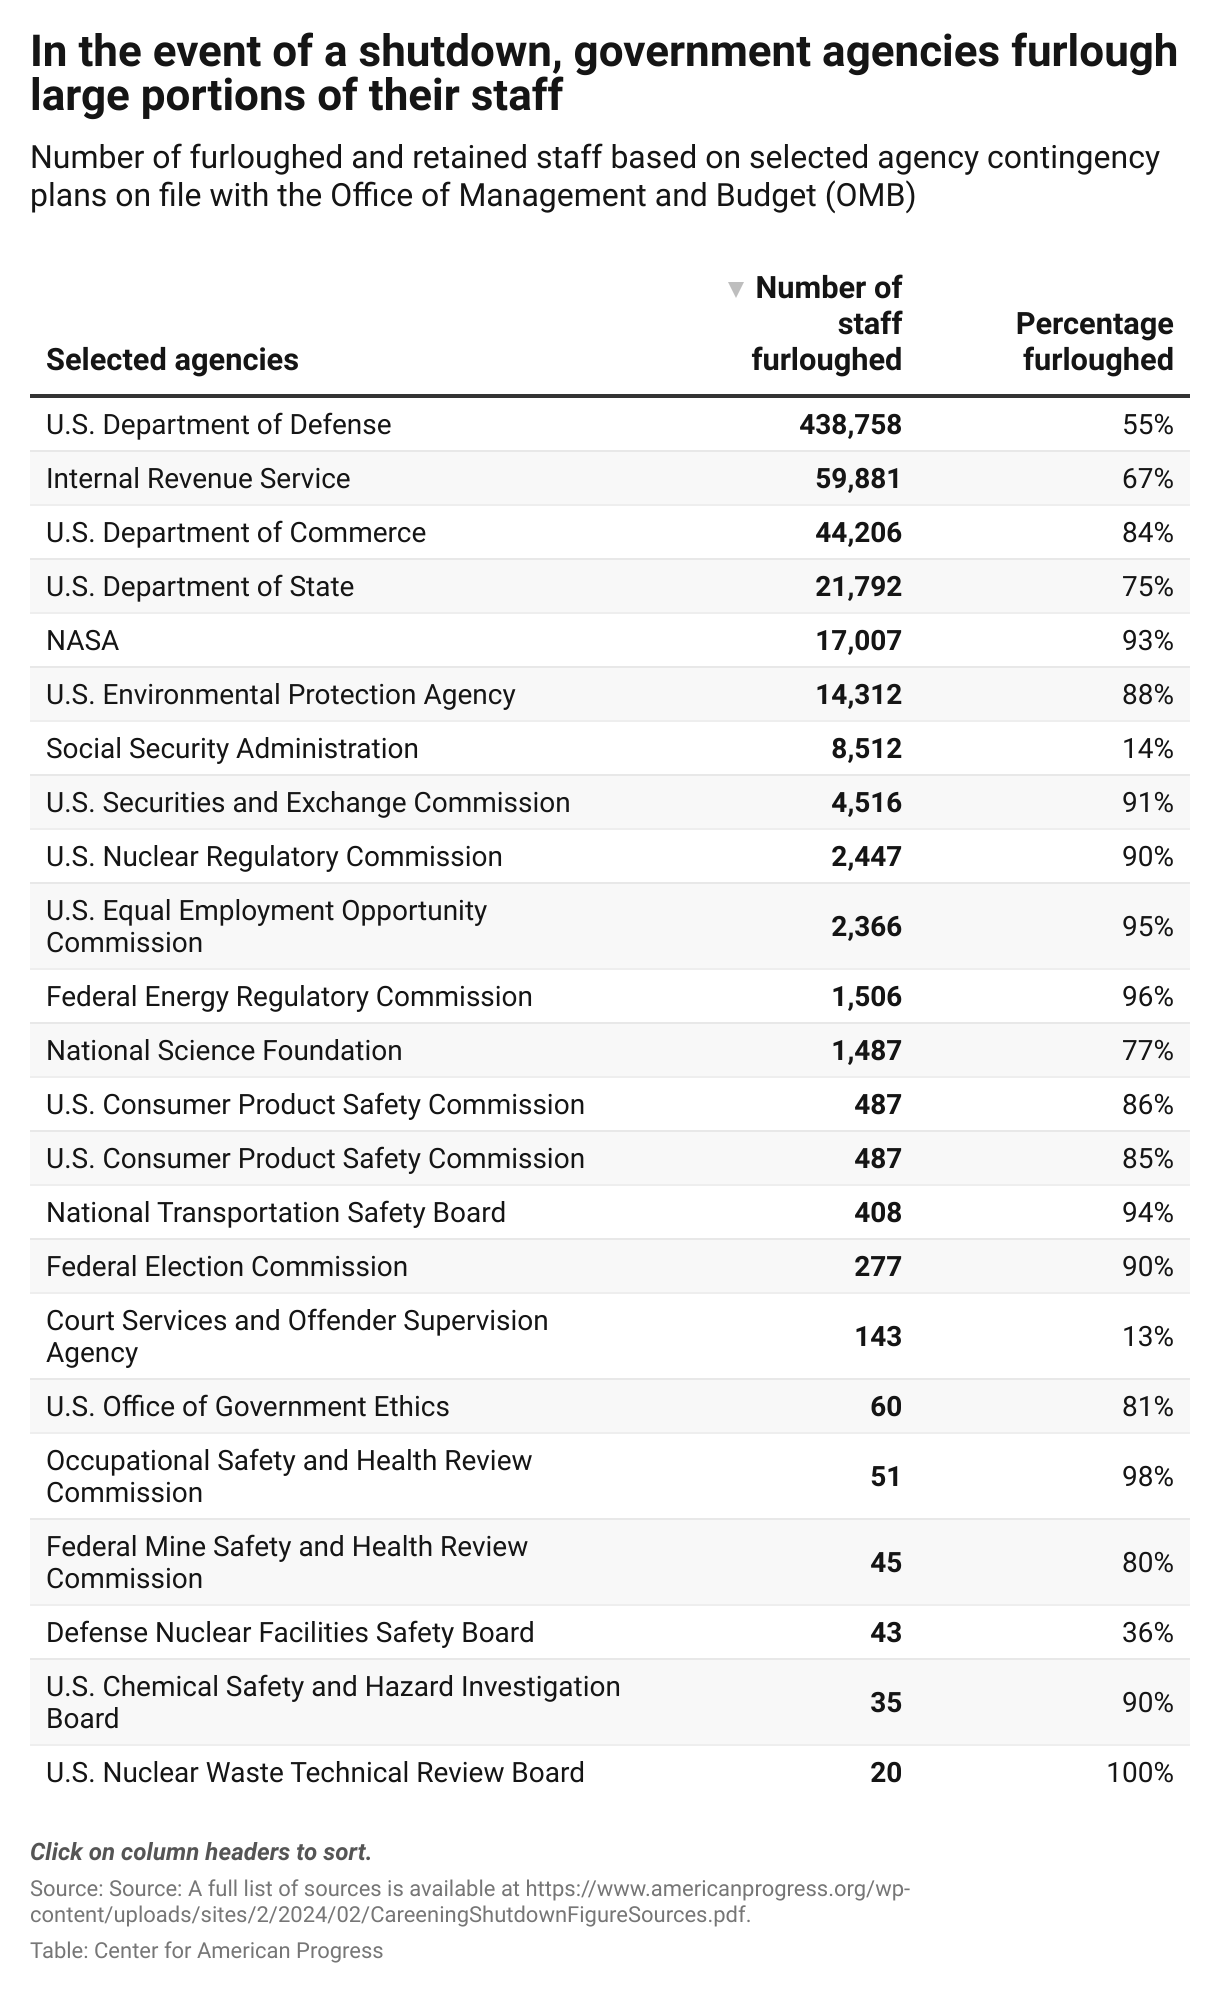 A table that depicts the number of employees who would be furloughed and retained in the event of an absence of federal appropriations. For example, the Social Security Administration would furlough 8,512 employees and retain 53,357 employees.